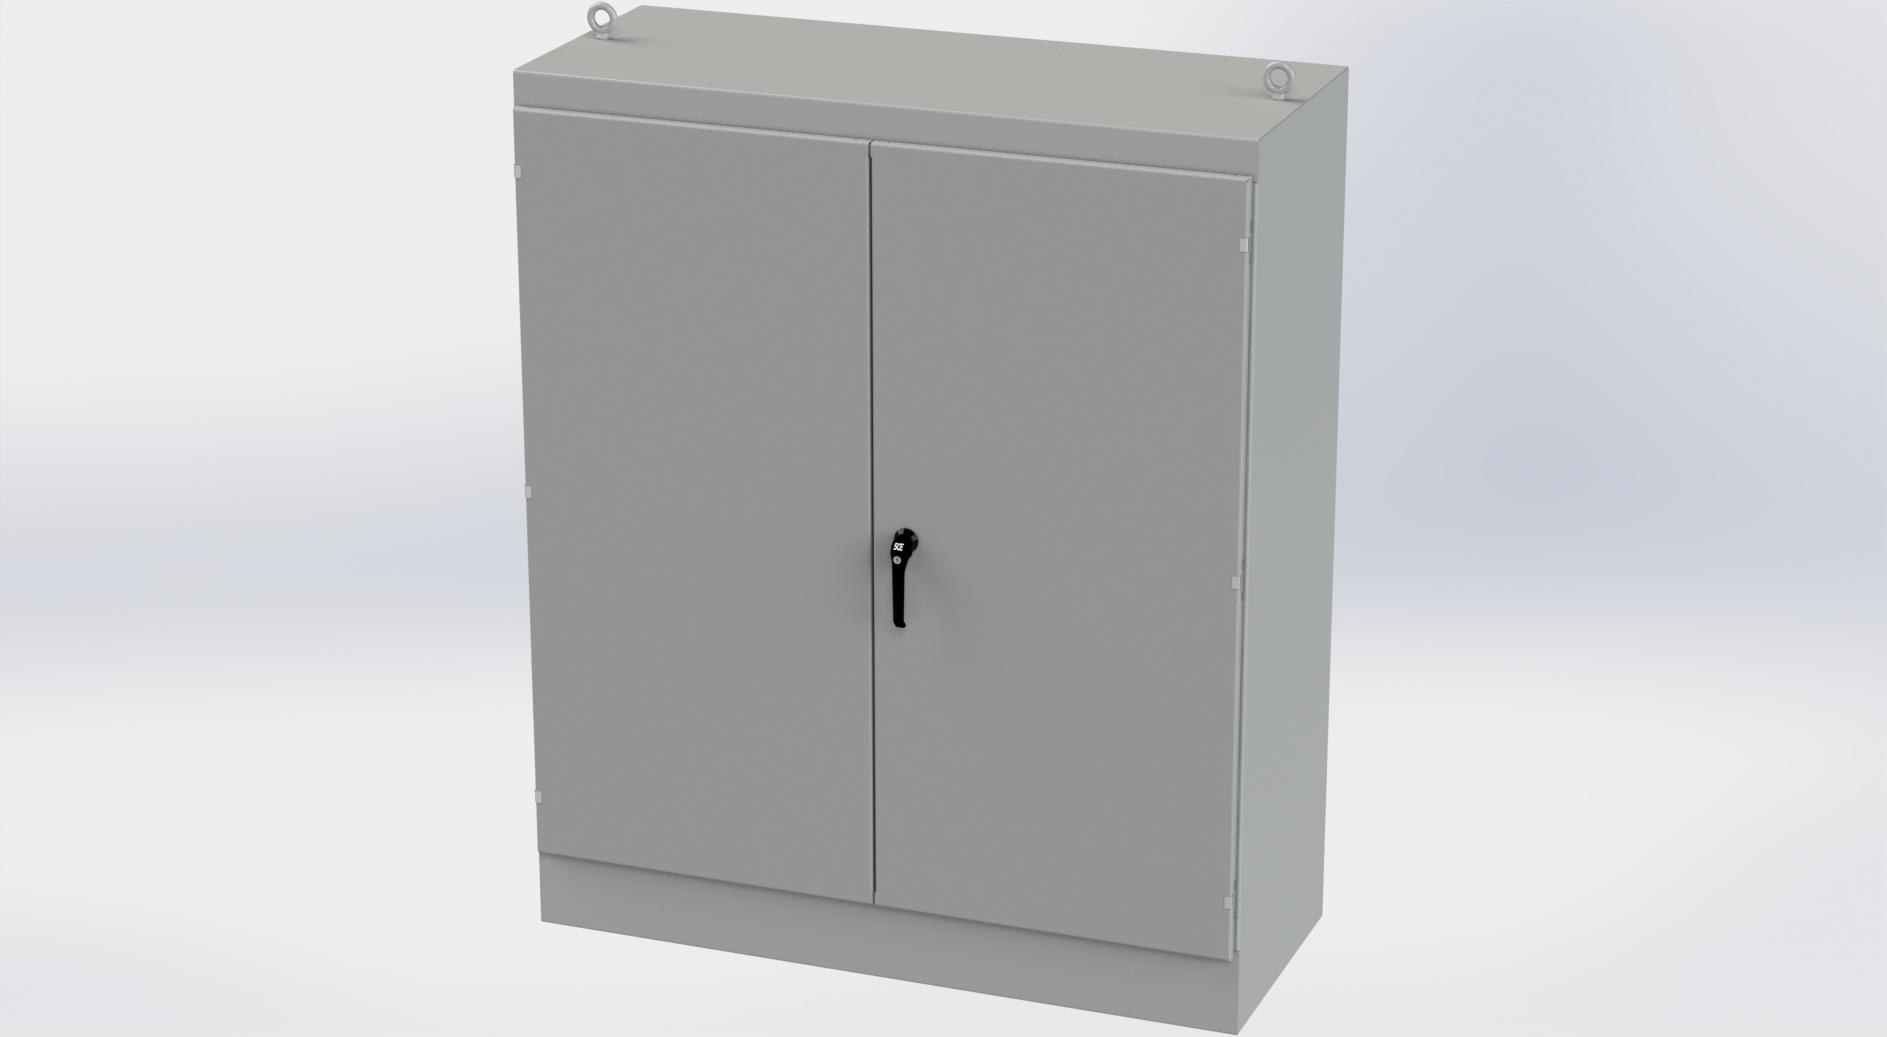 Saginaw Control SCE-726024FSD FSD Enclosure, Height:72.00", Width:60.00", Depth:24.00", ANSI-61 gray finish inside and out. Optional sub-panels are powder coated white.